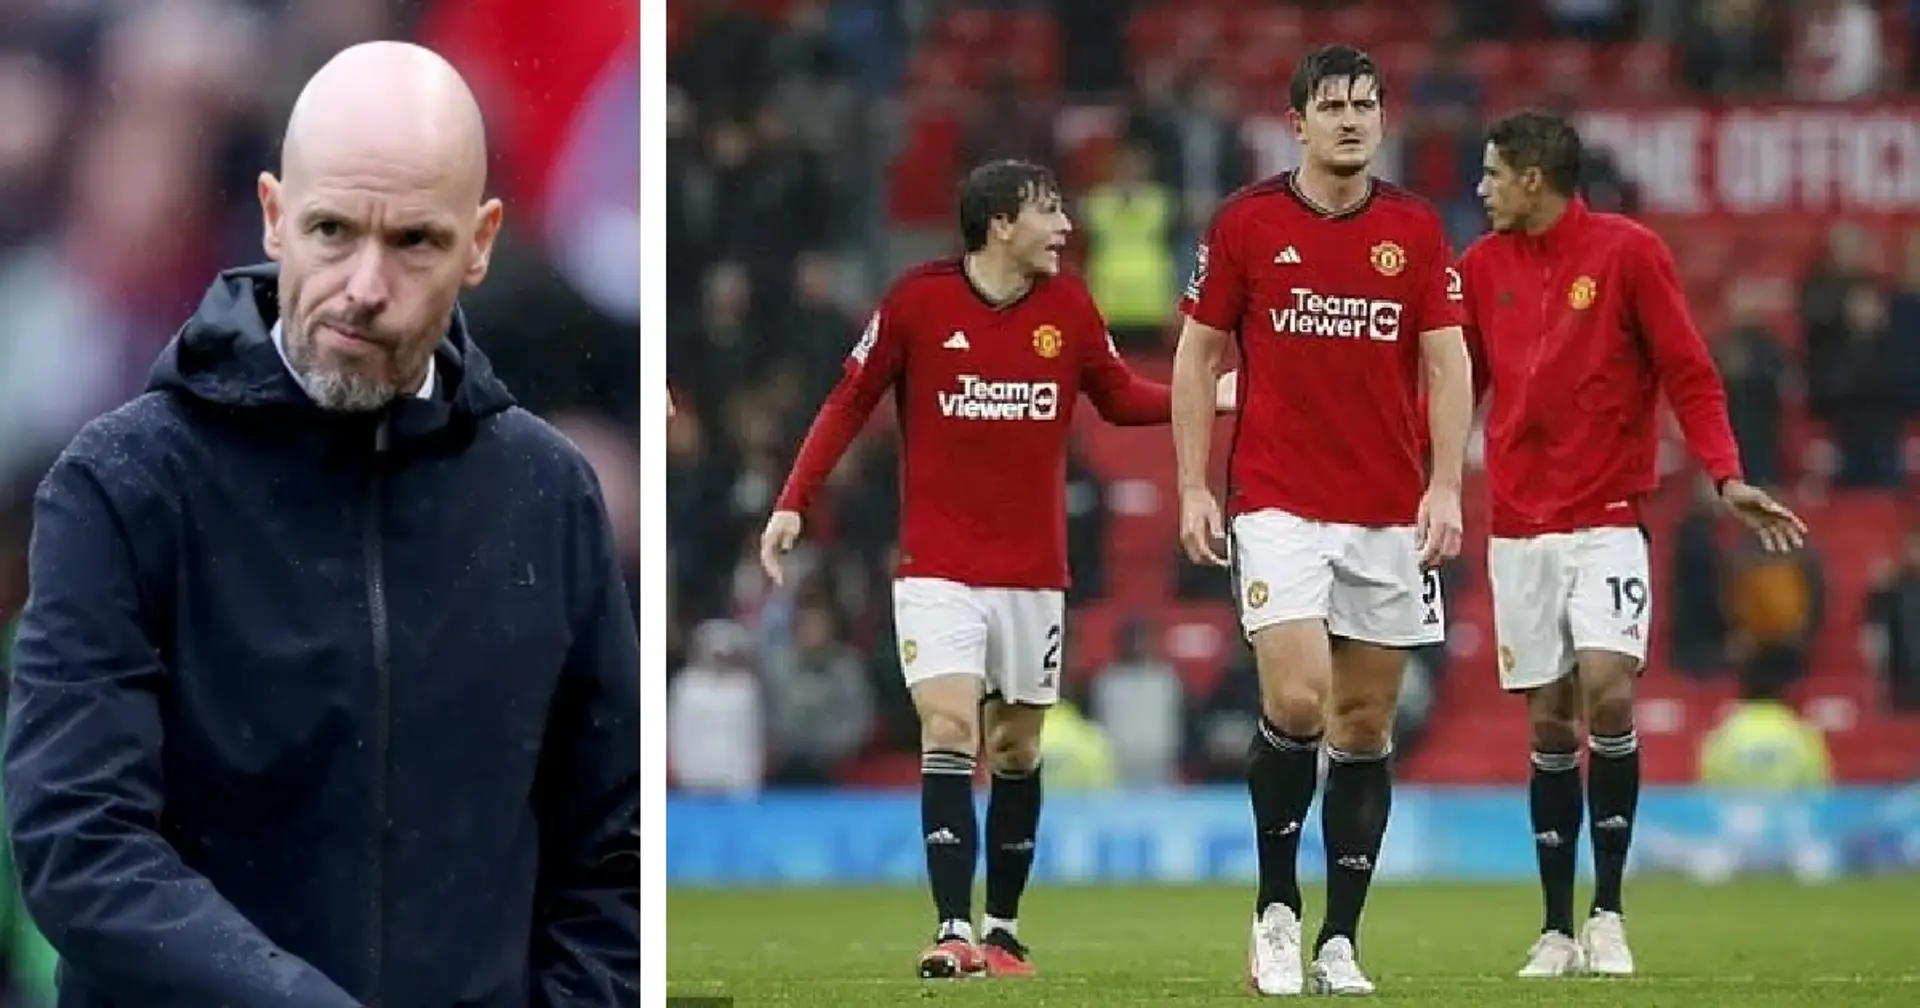 Ten Hag responds to Man United fans booing their team after Crystal Palace defeat